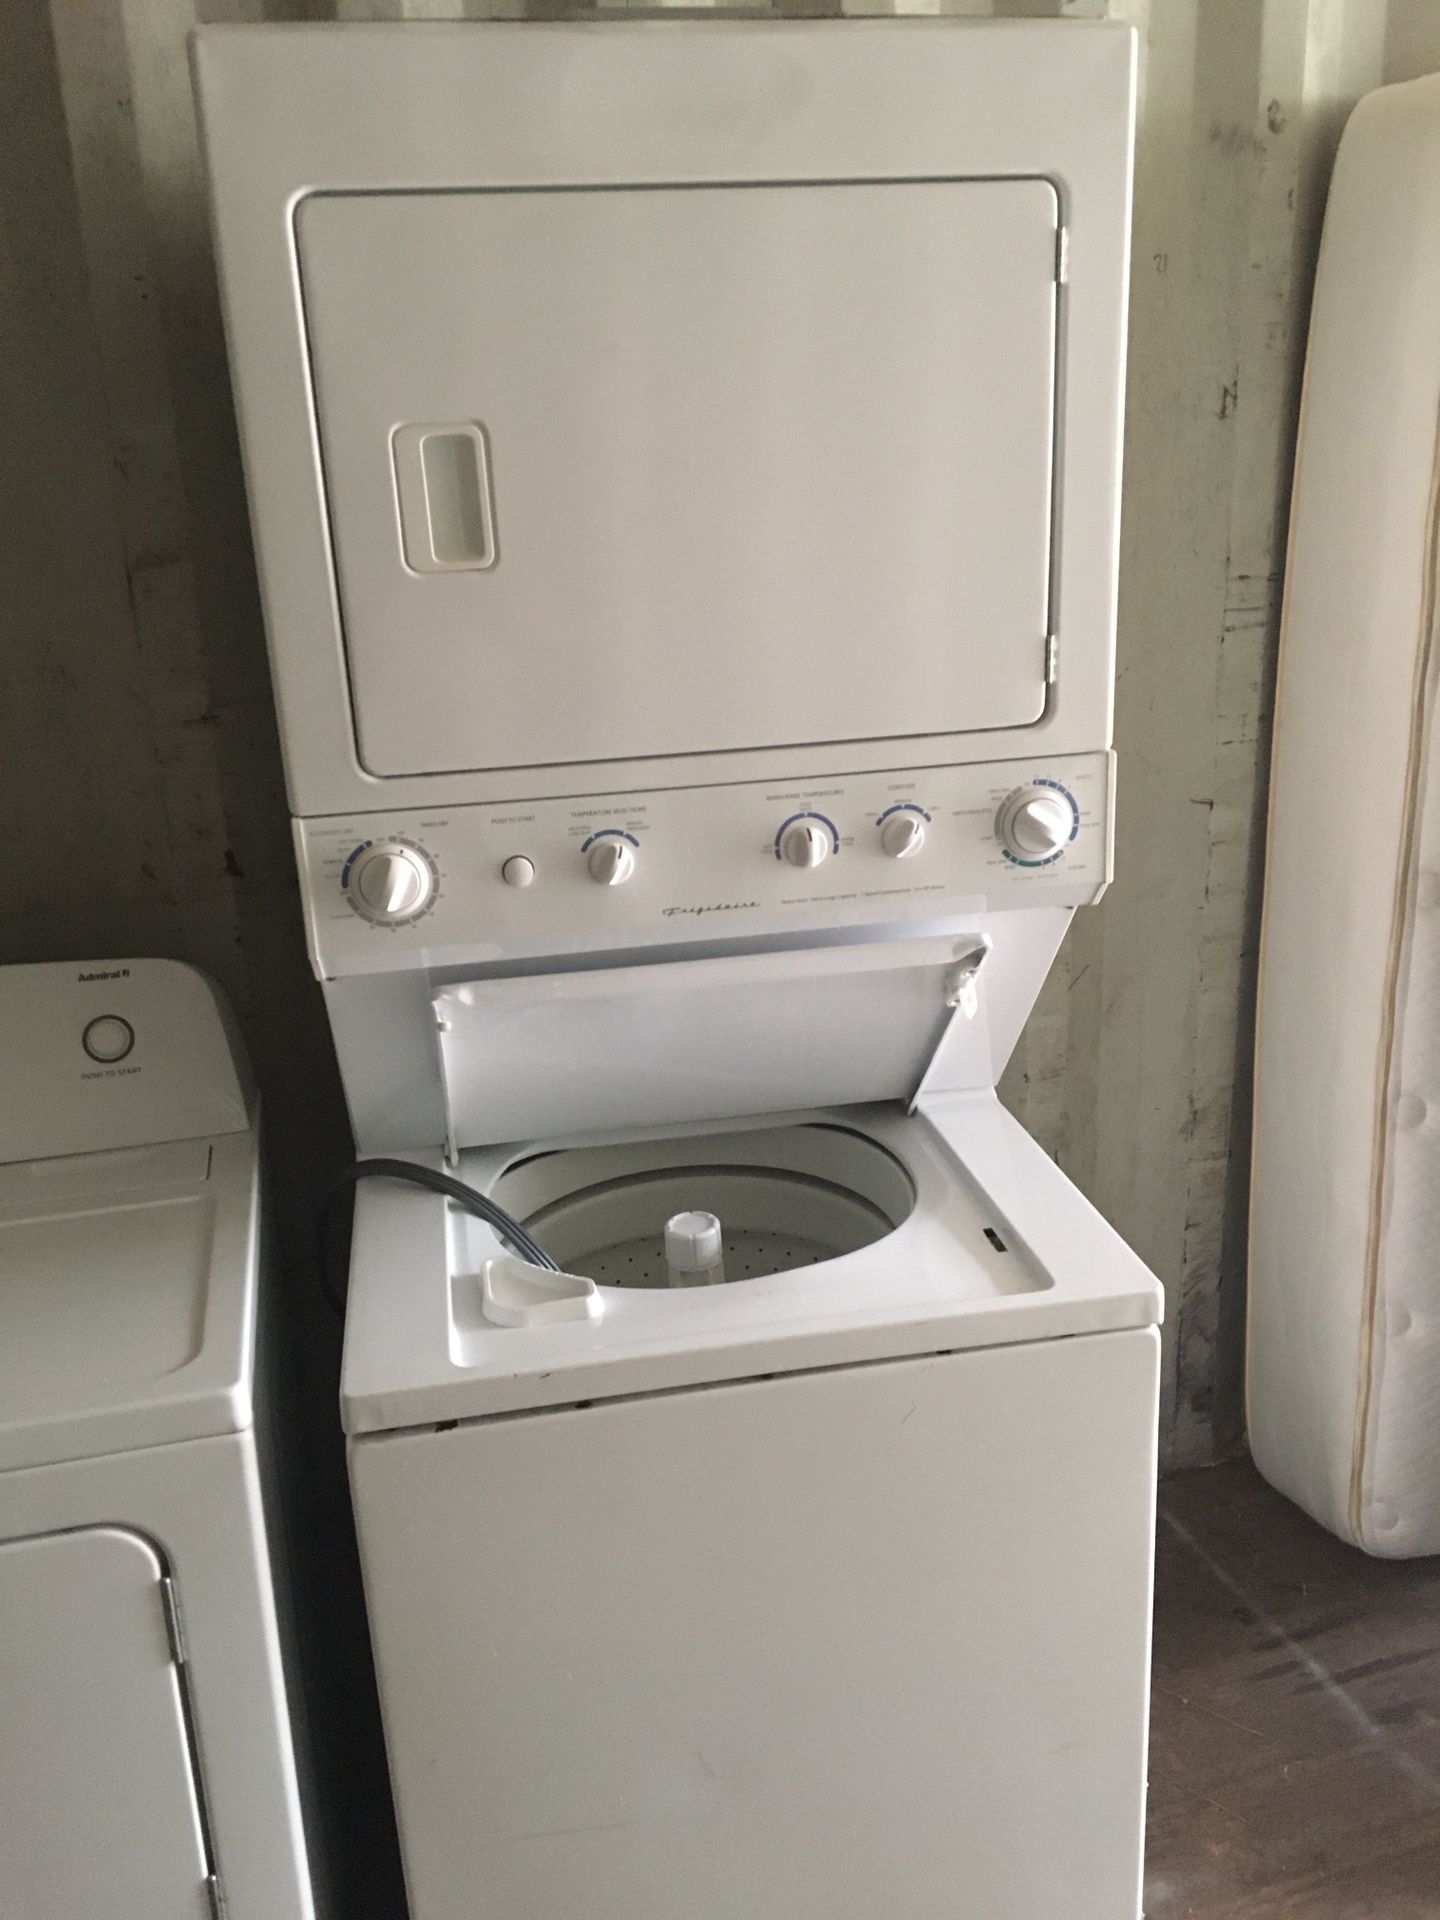 FRIGIDAIRE STACKABLE WASHER AND DRYER COMBO 27 " wide